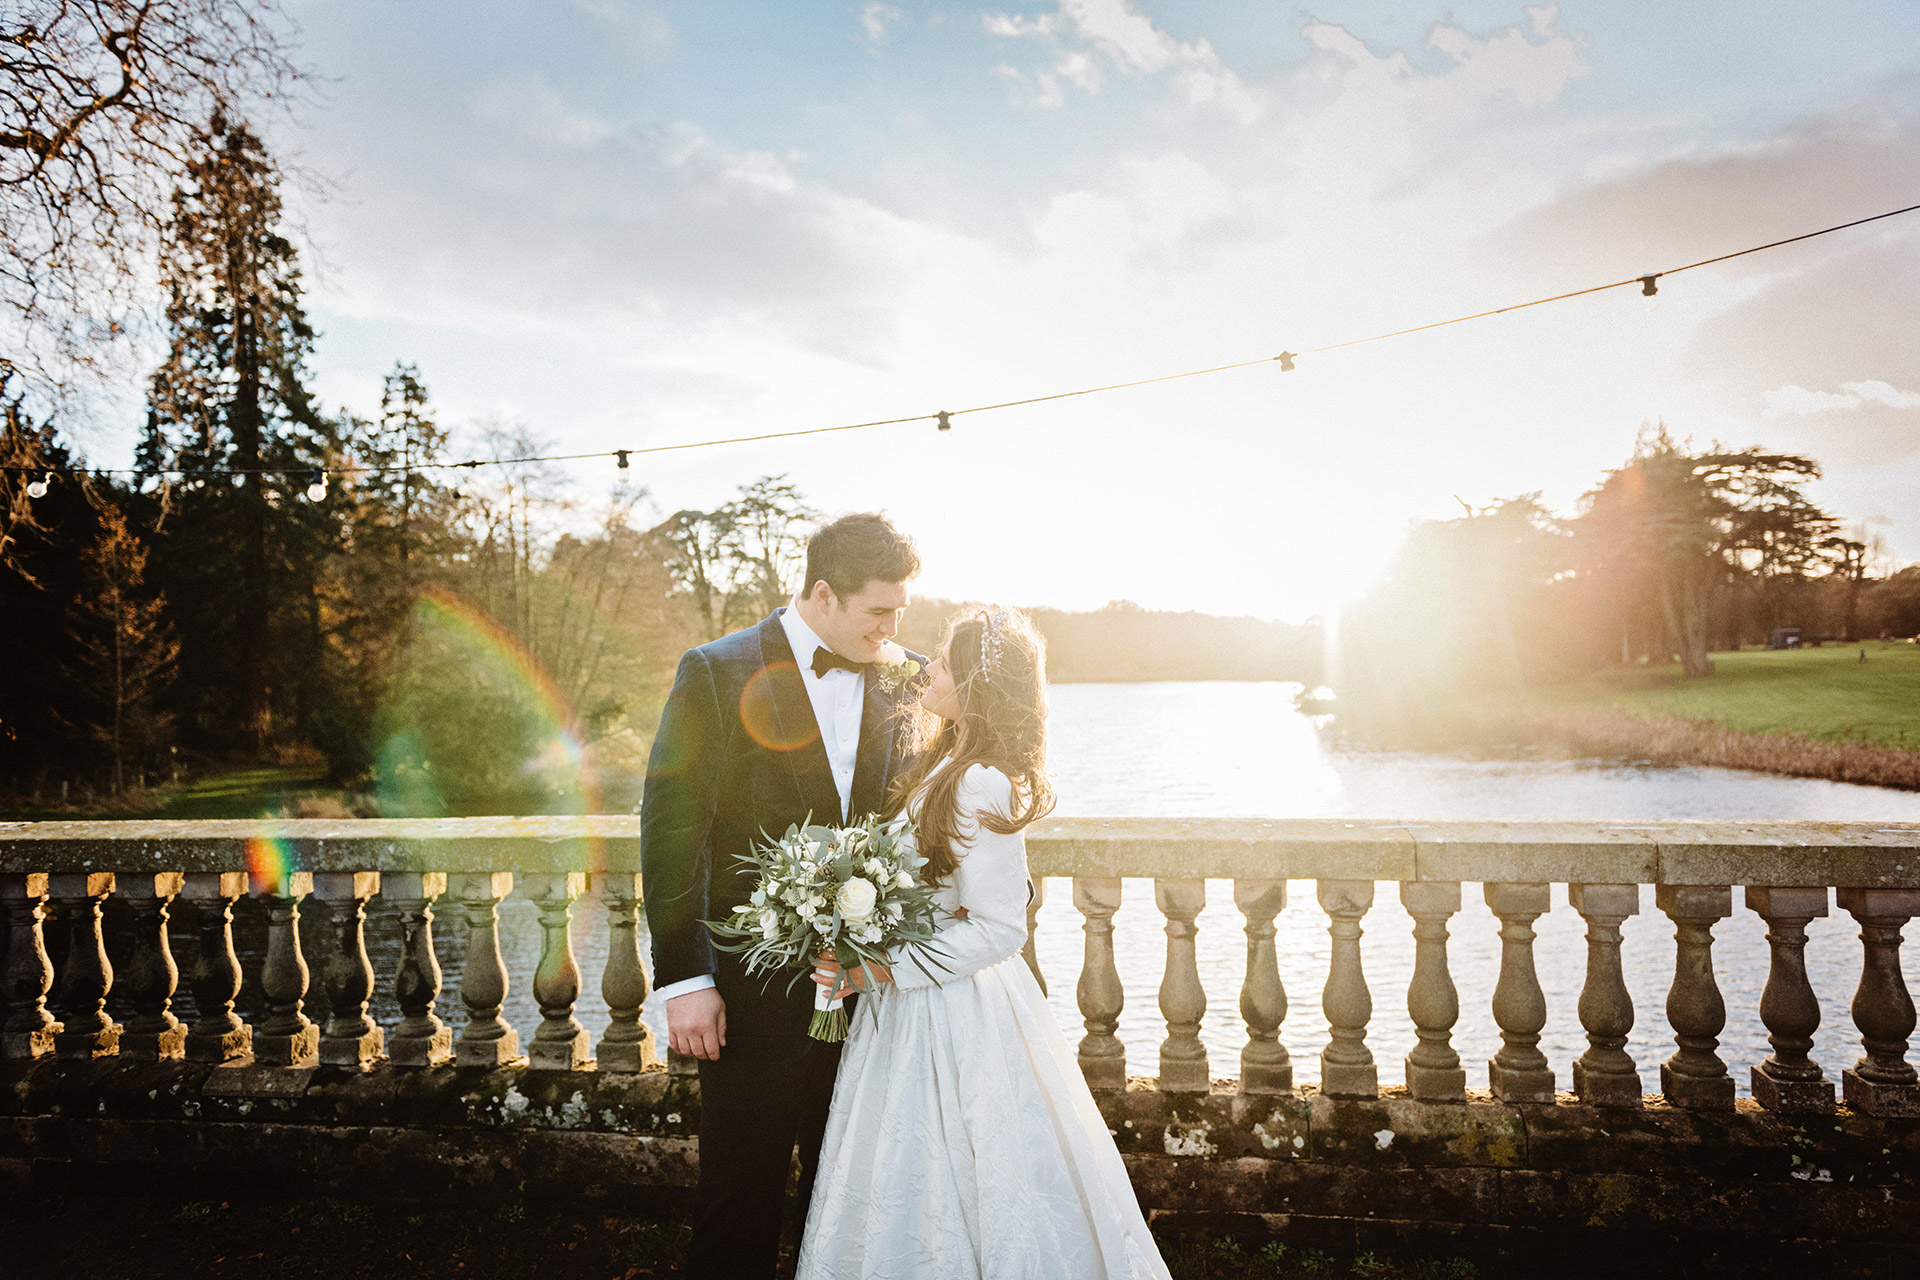 Bride and groom kiss on a bridge over a lake with a stunning sunset in the background